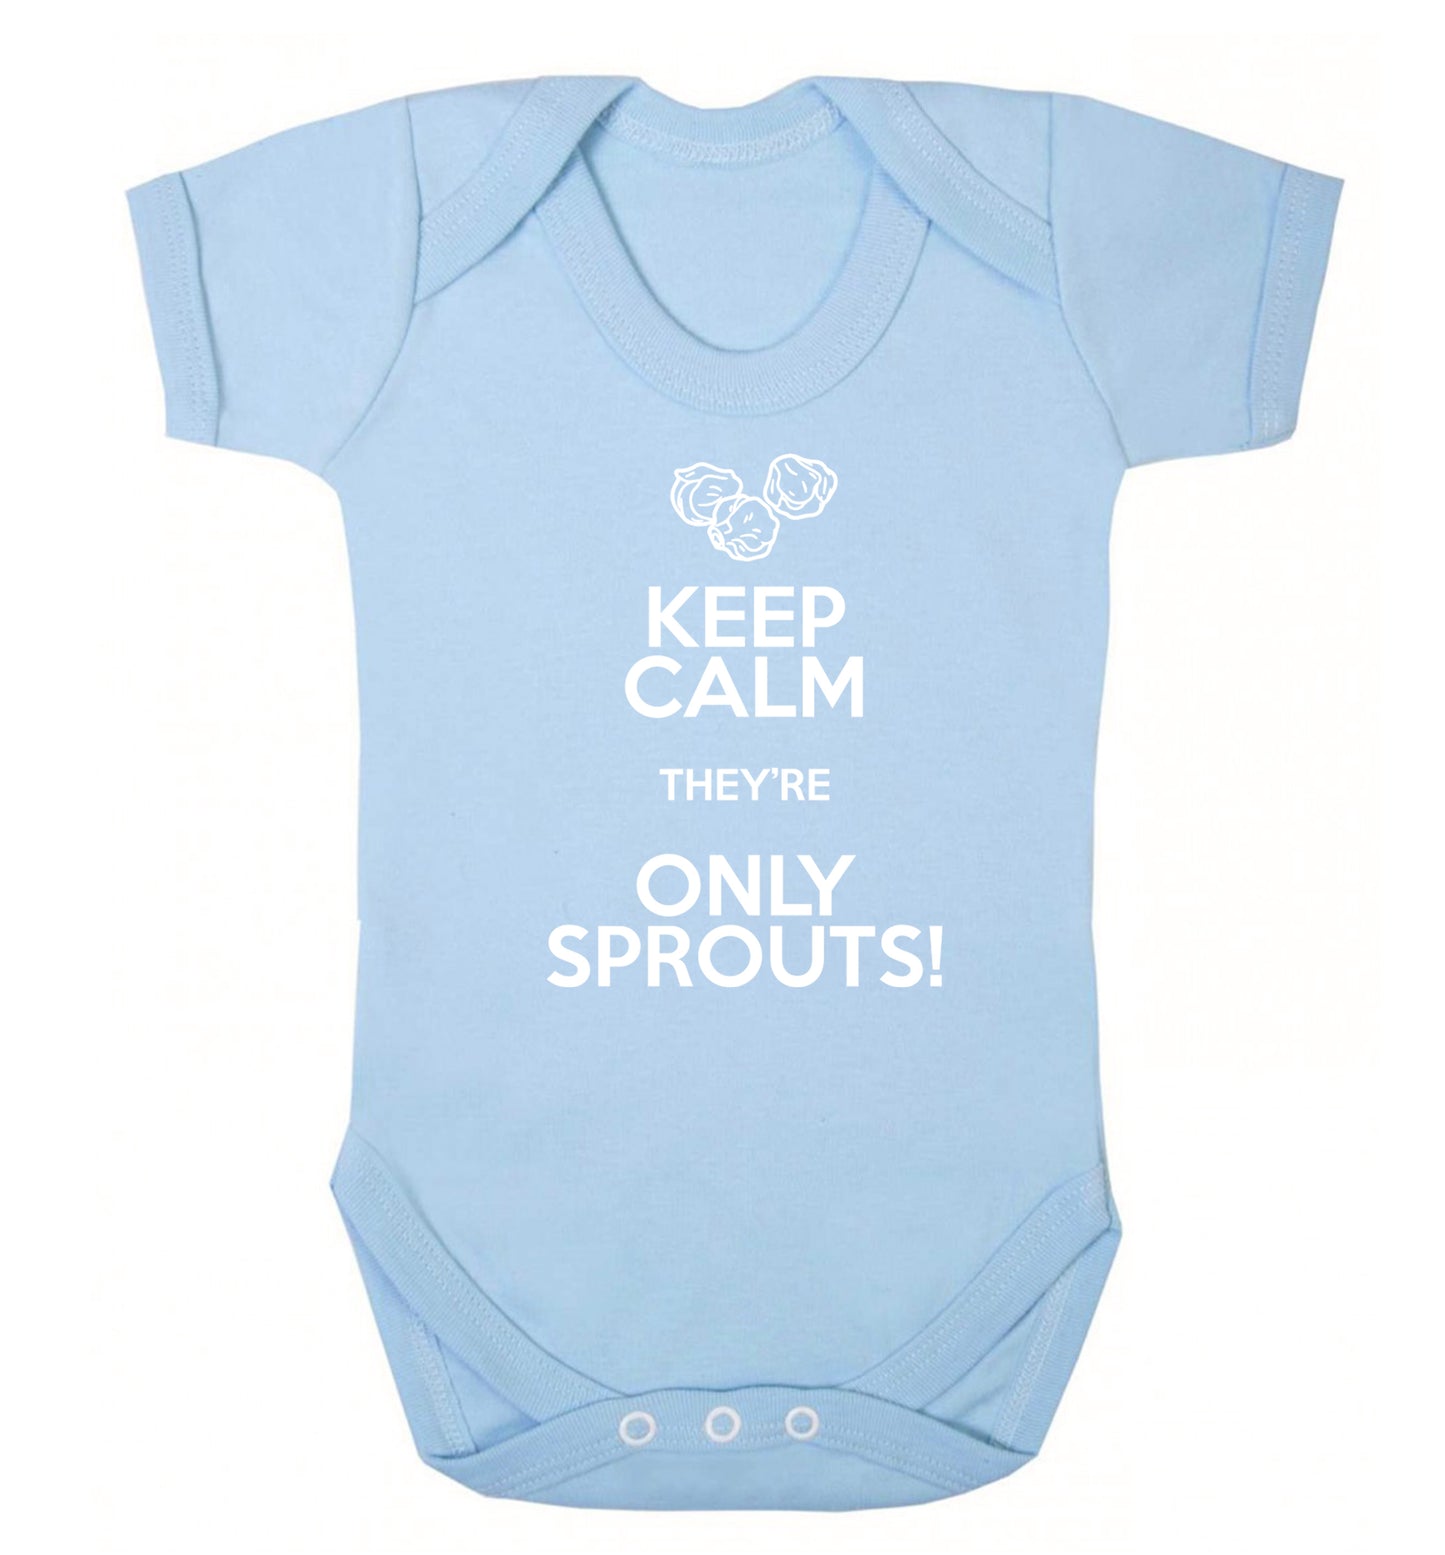 Keep calm they're only sprouts Baby Vest pale blue 18-24 months